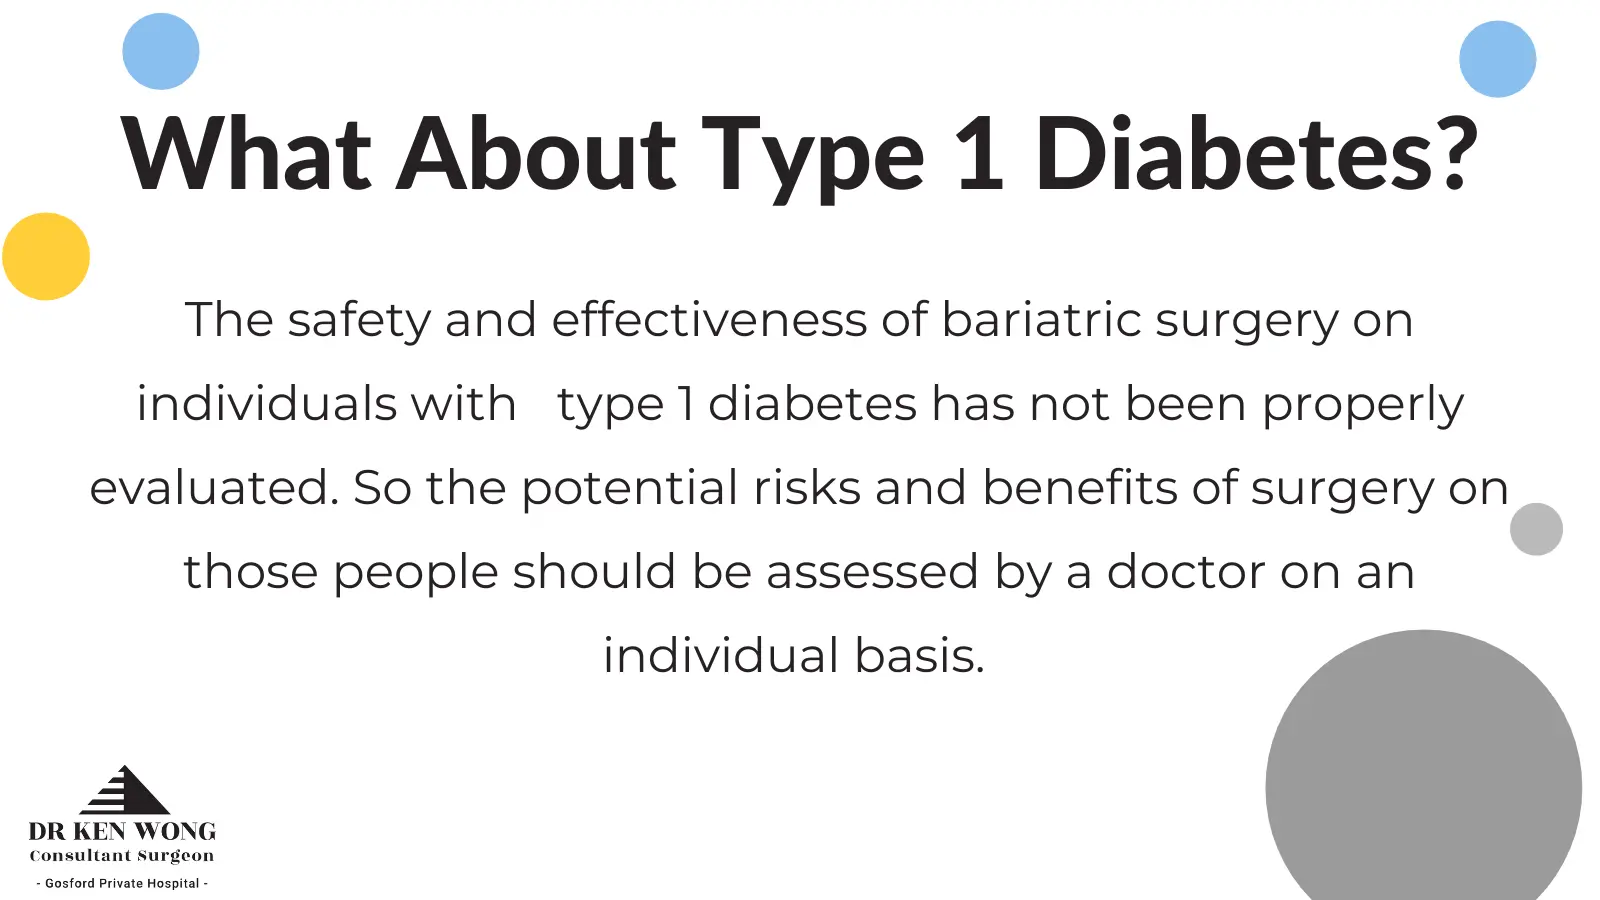 bariatric surgery for type 1 diabetes